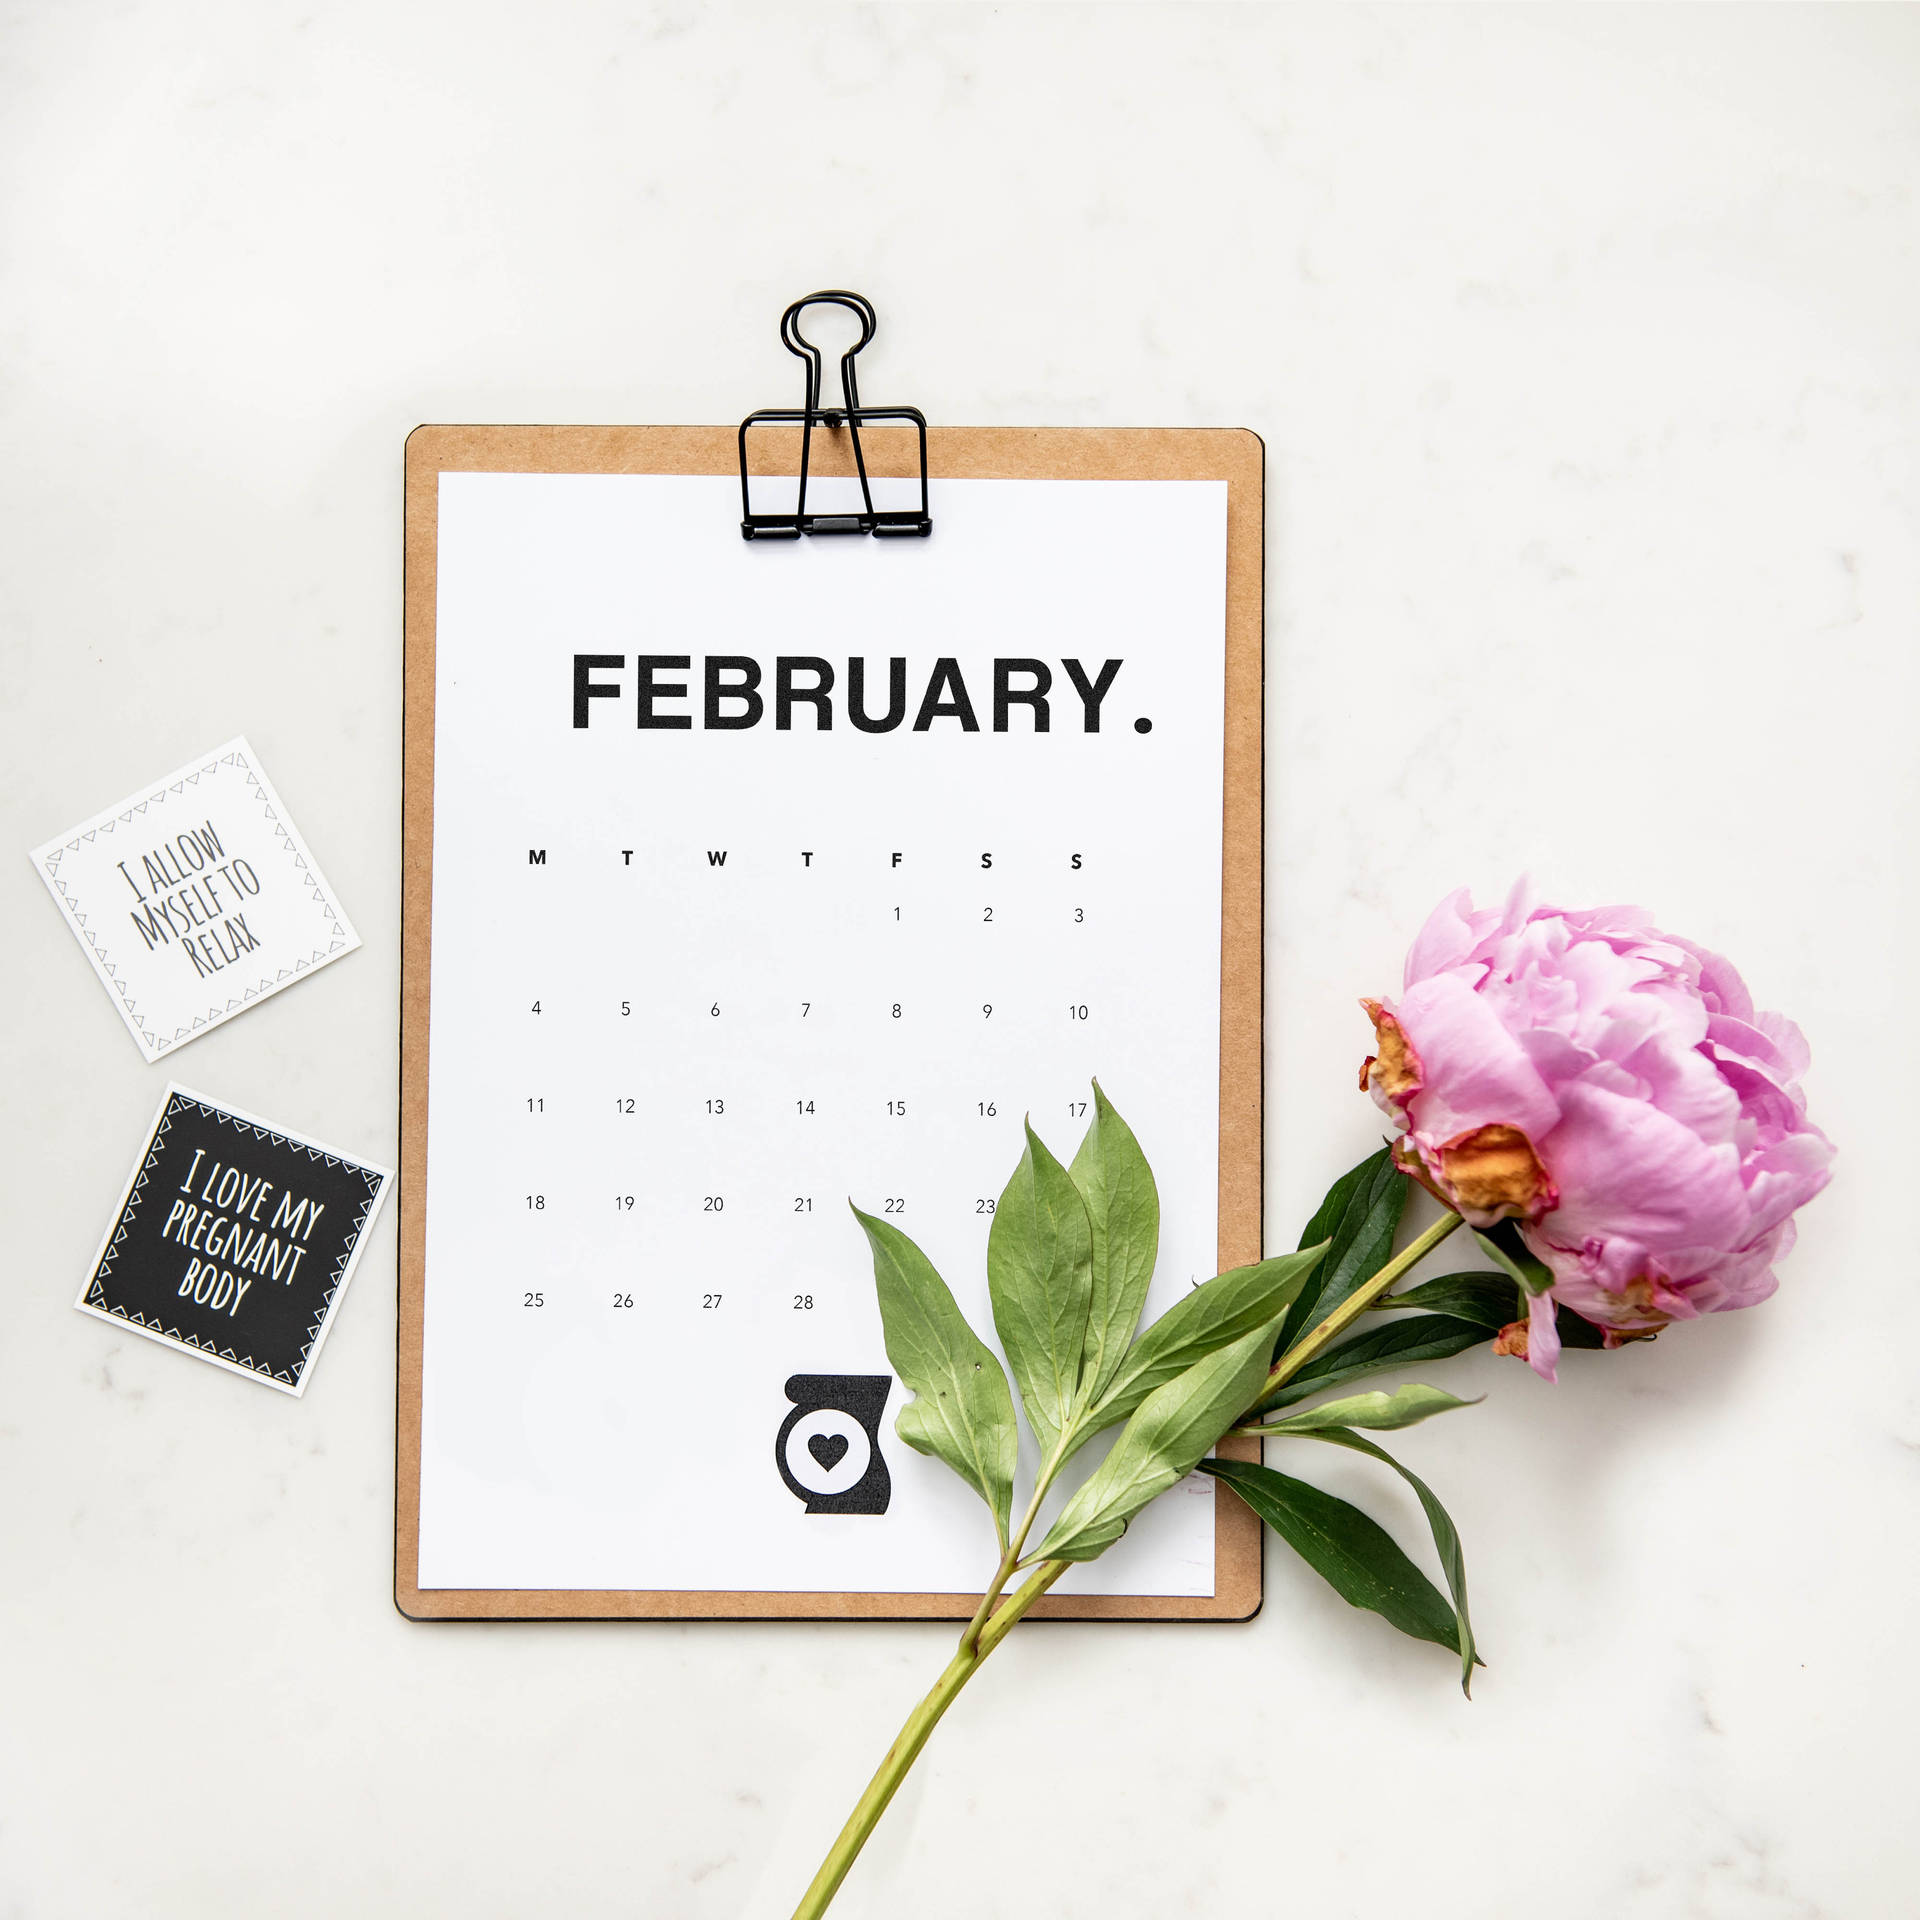 Enjoy The Beautiful Month Of February With This Pretty Pink Rose Calendar Background